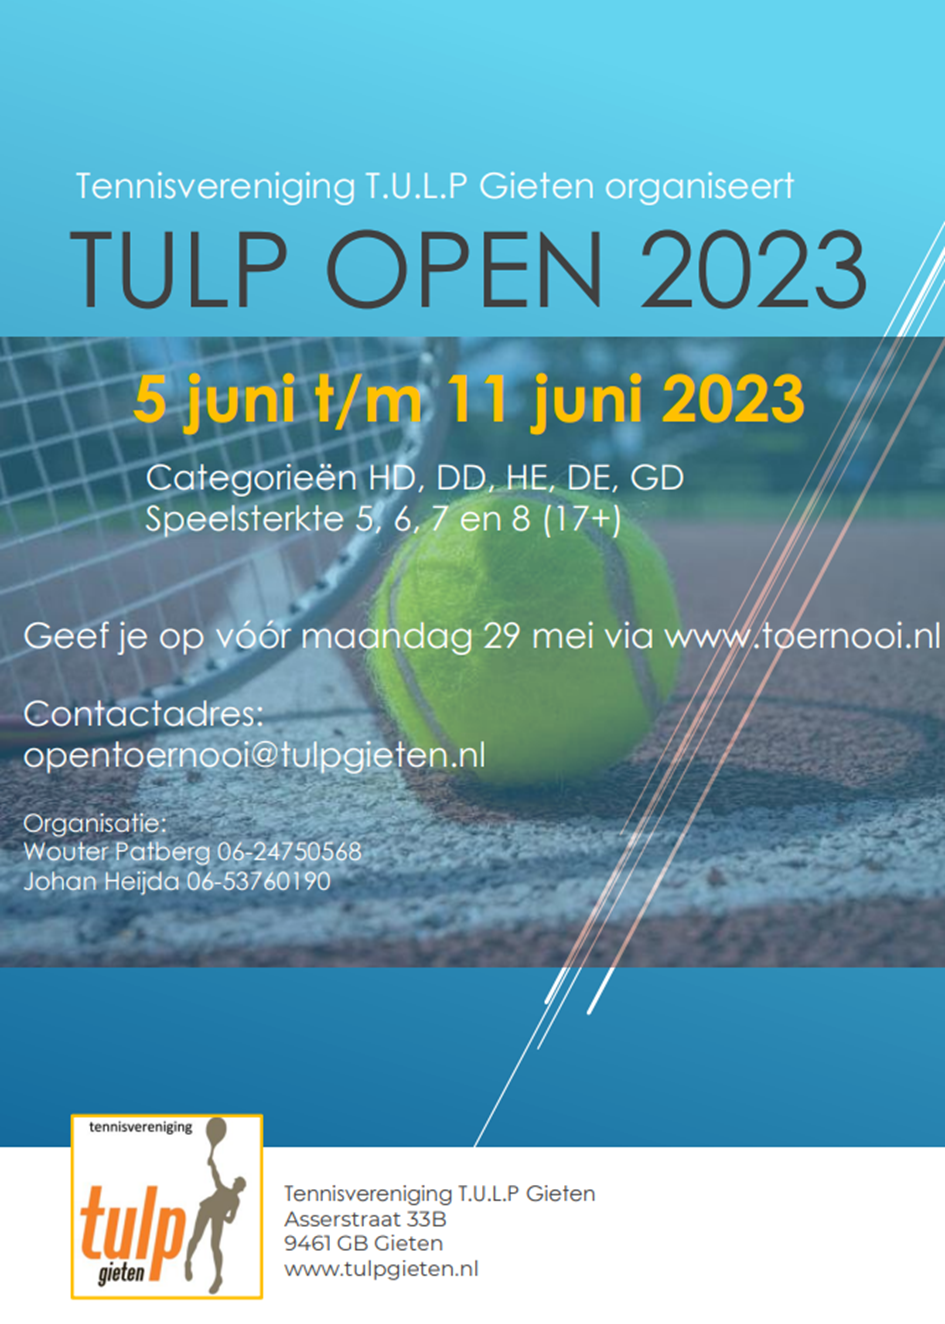 Tulp Open 2023 knipsel.PNG